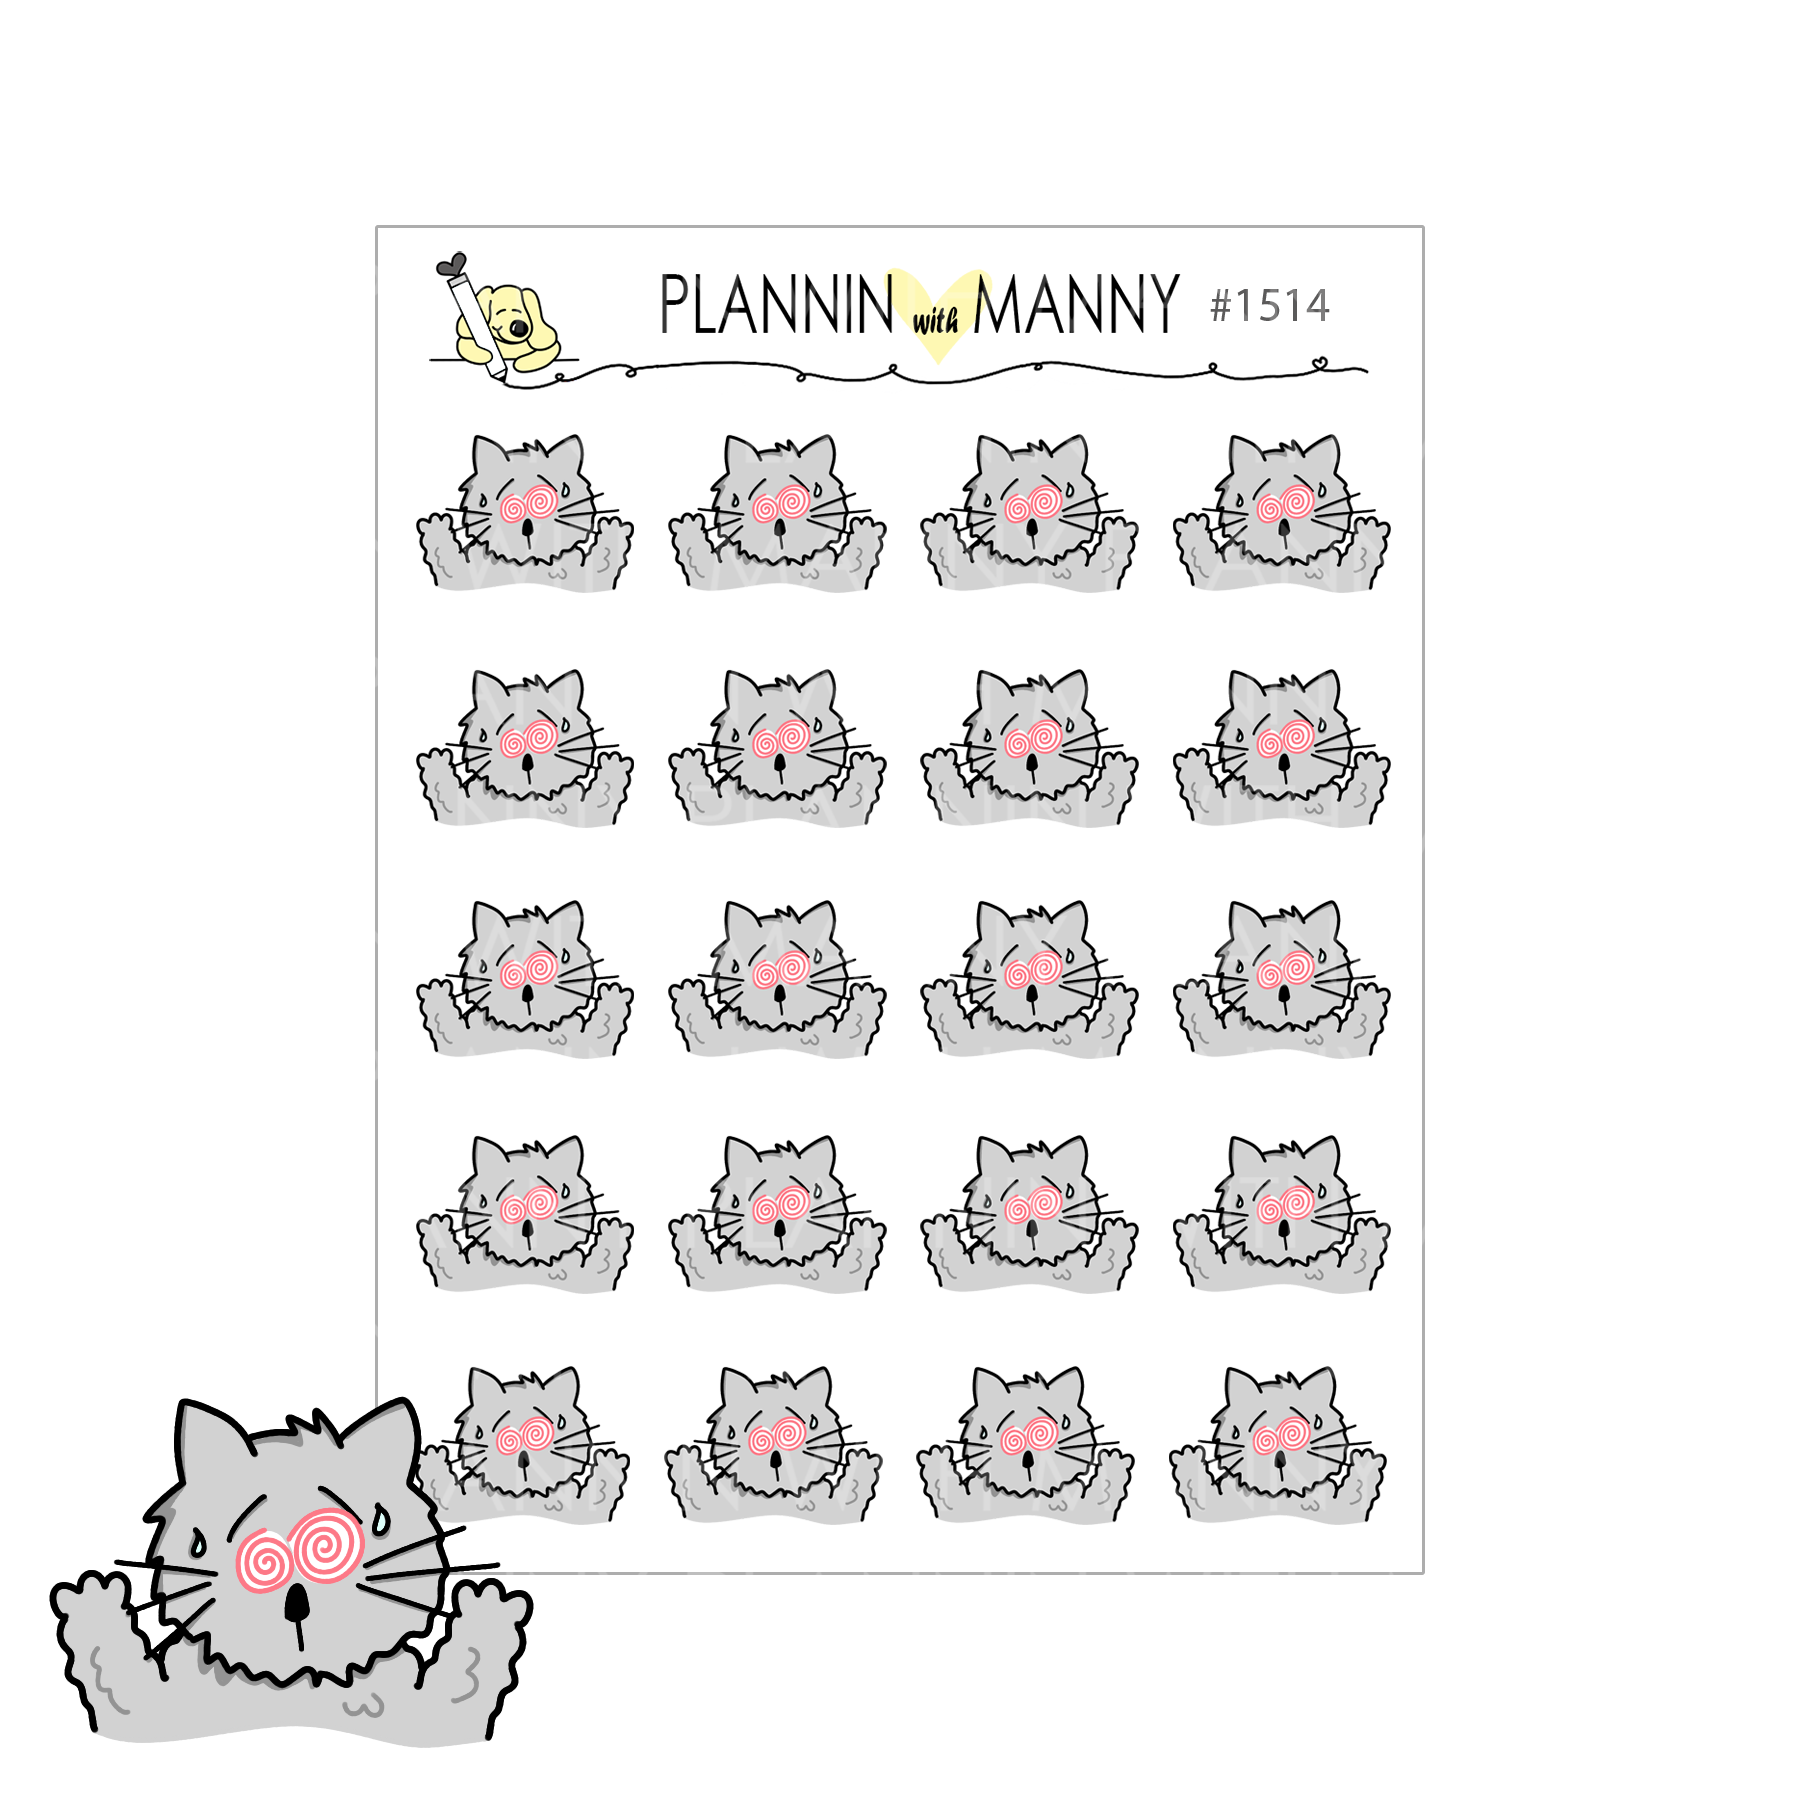 1514 Crazy Confused Owen Planner Stickers